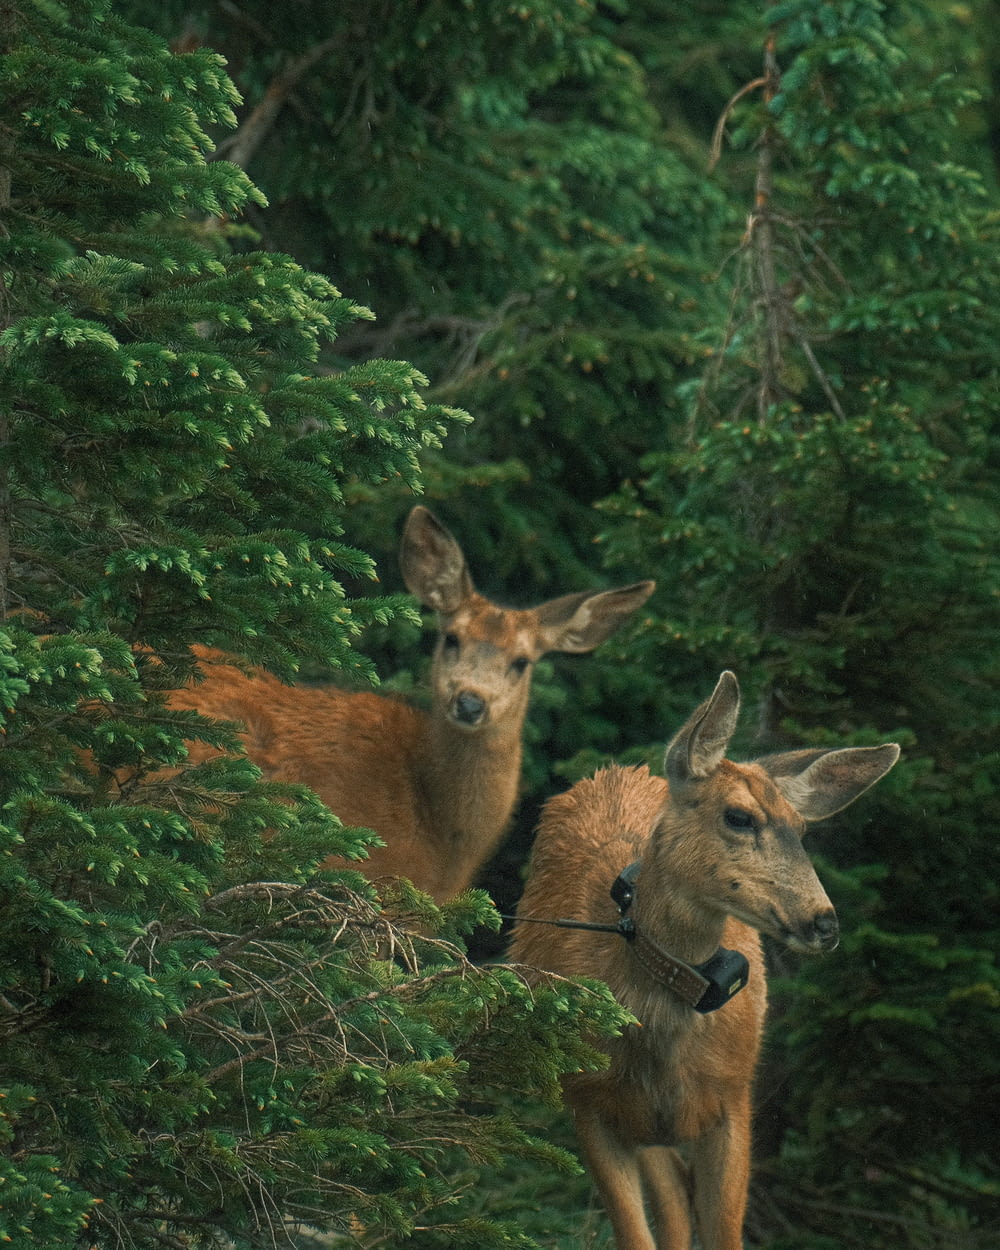 two deer standing next to each other in a forest